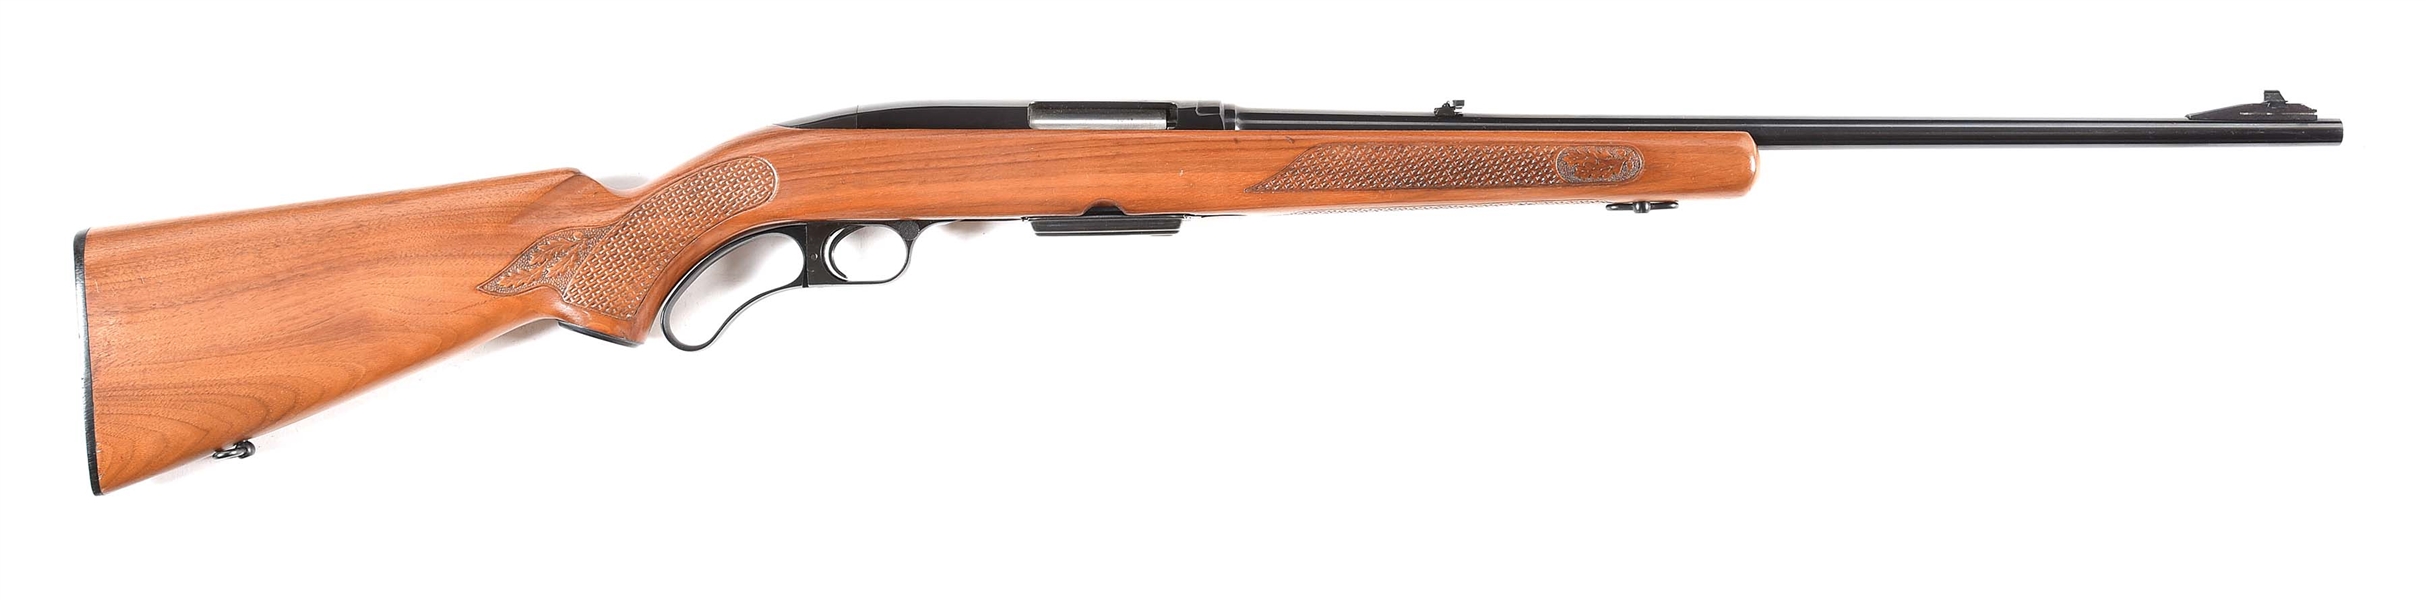 (C) WINCHESTER 88 LEVER ACTION RIFLE.